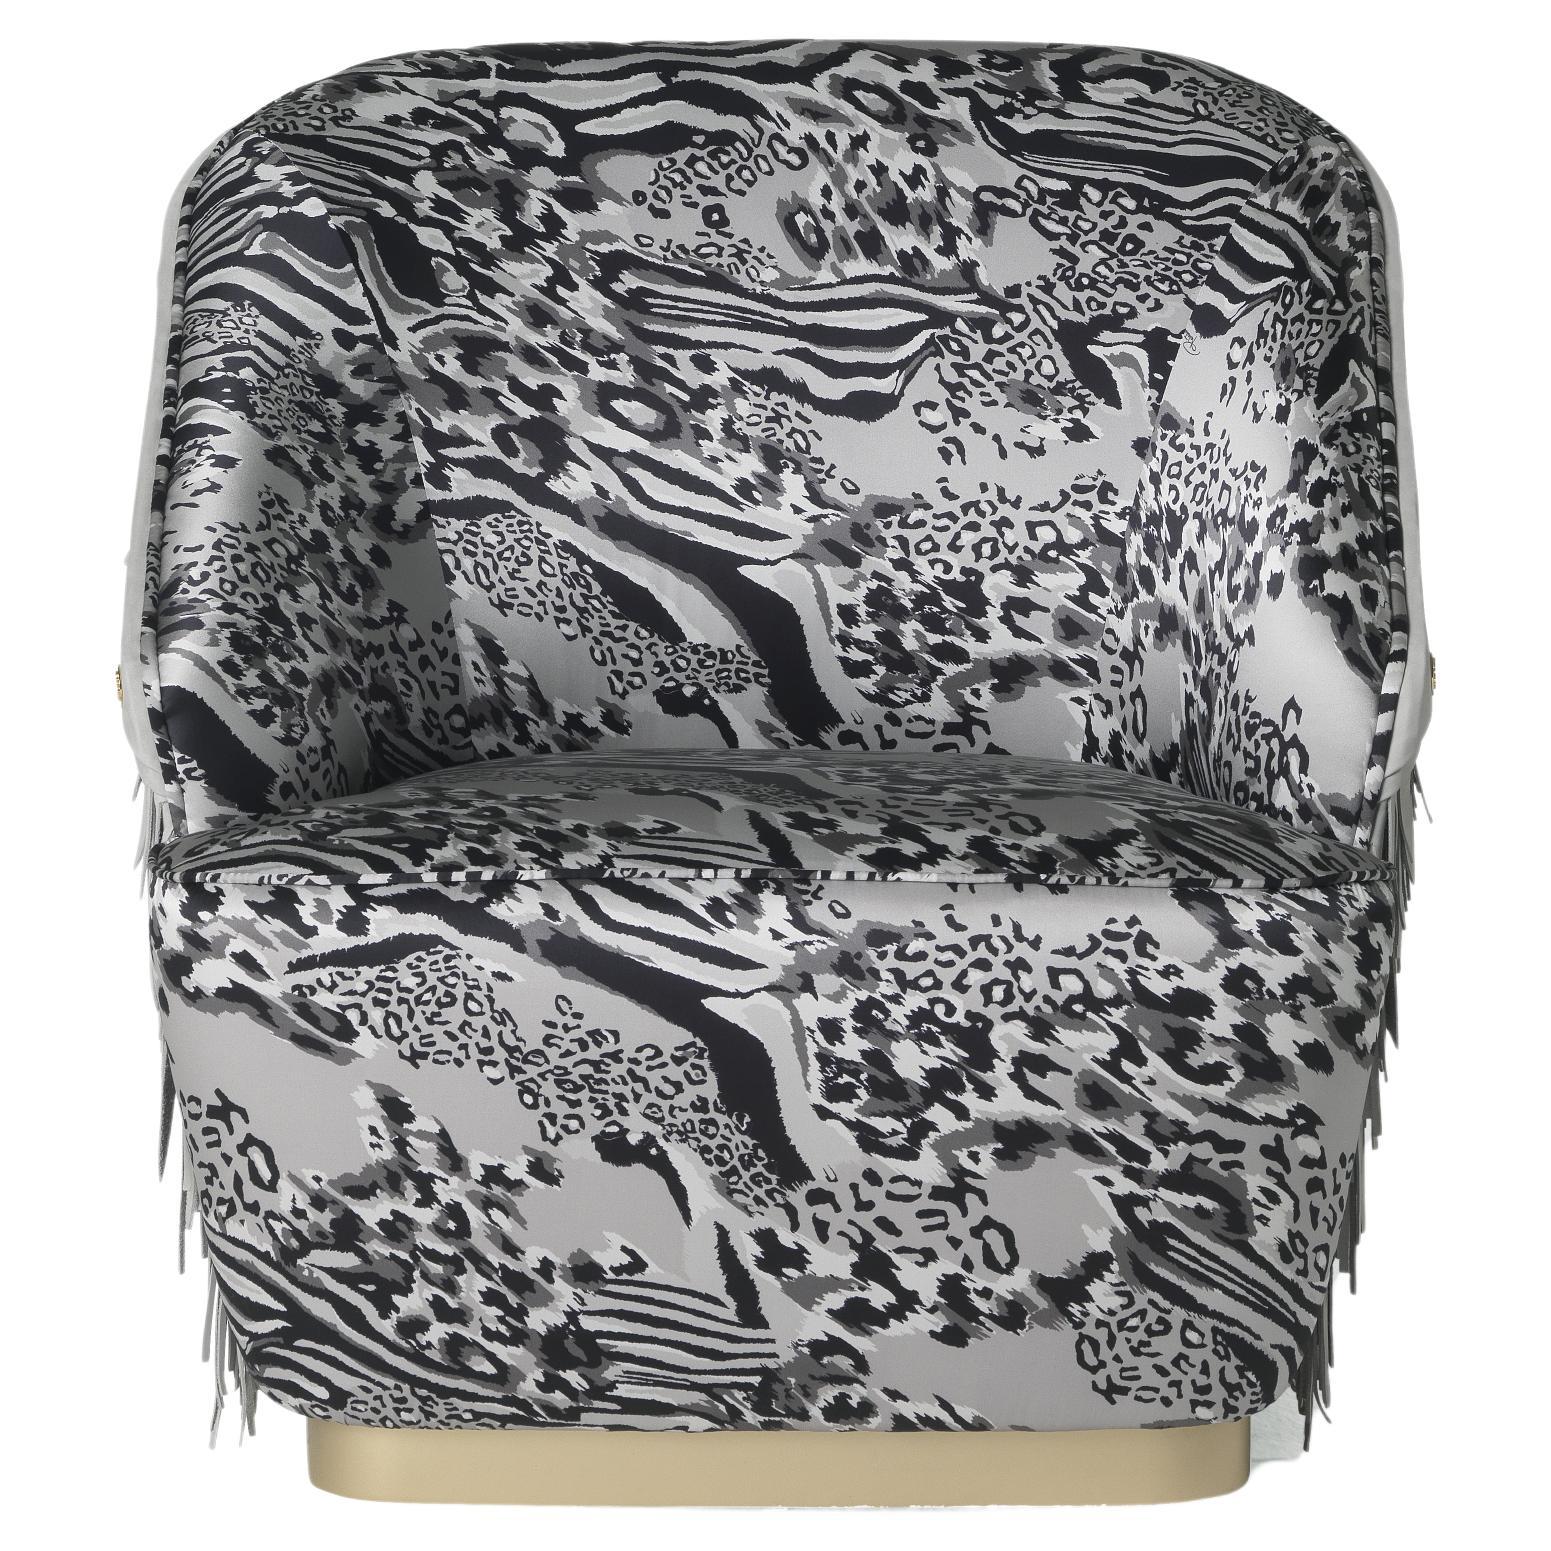 21st Century Dudley Armchair in Printed Fabric by Roberto Cavalli Home Interiors For Sale